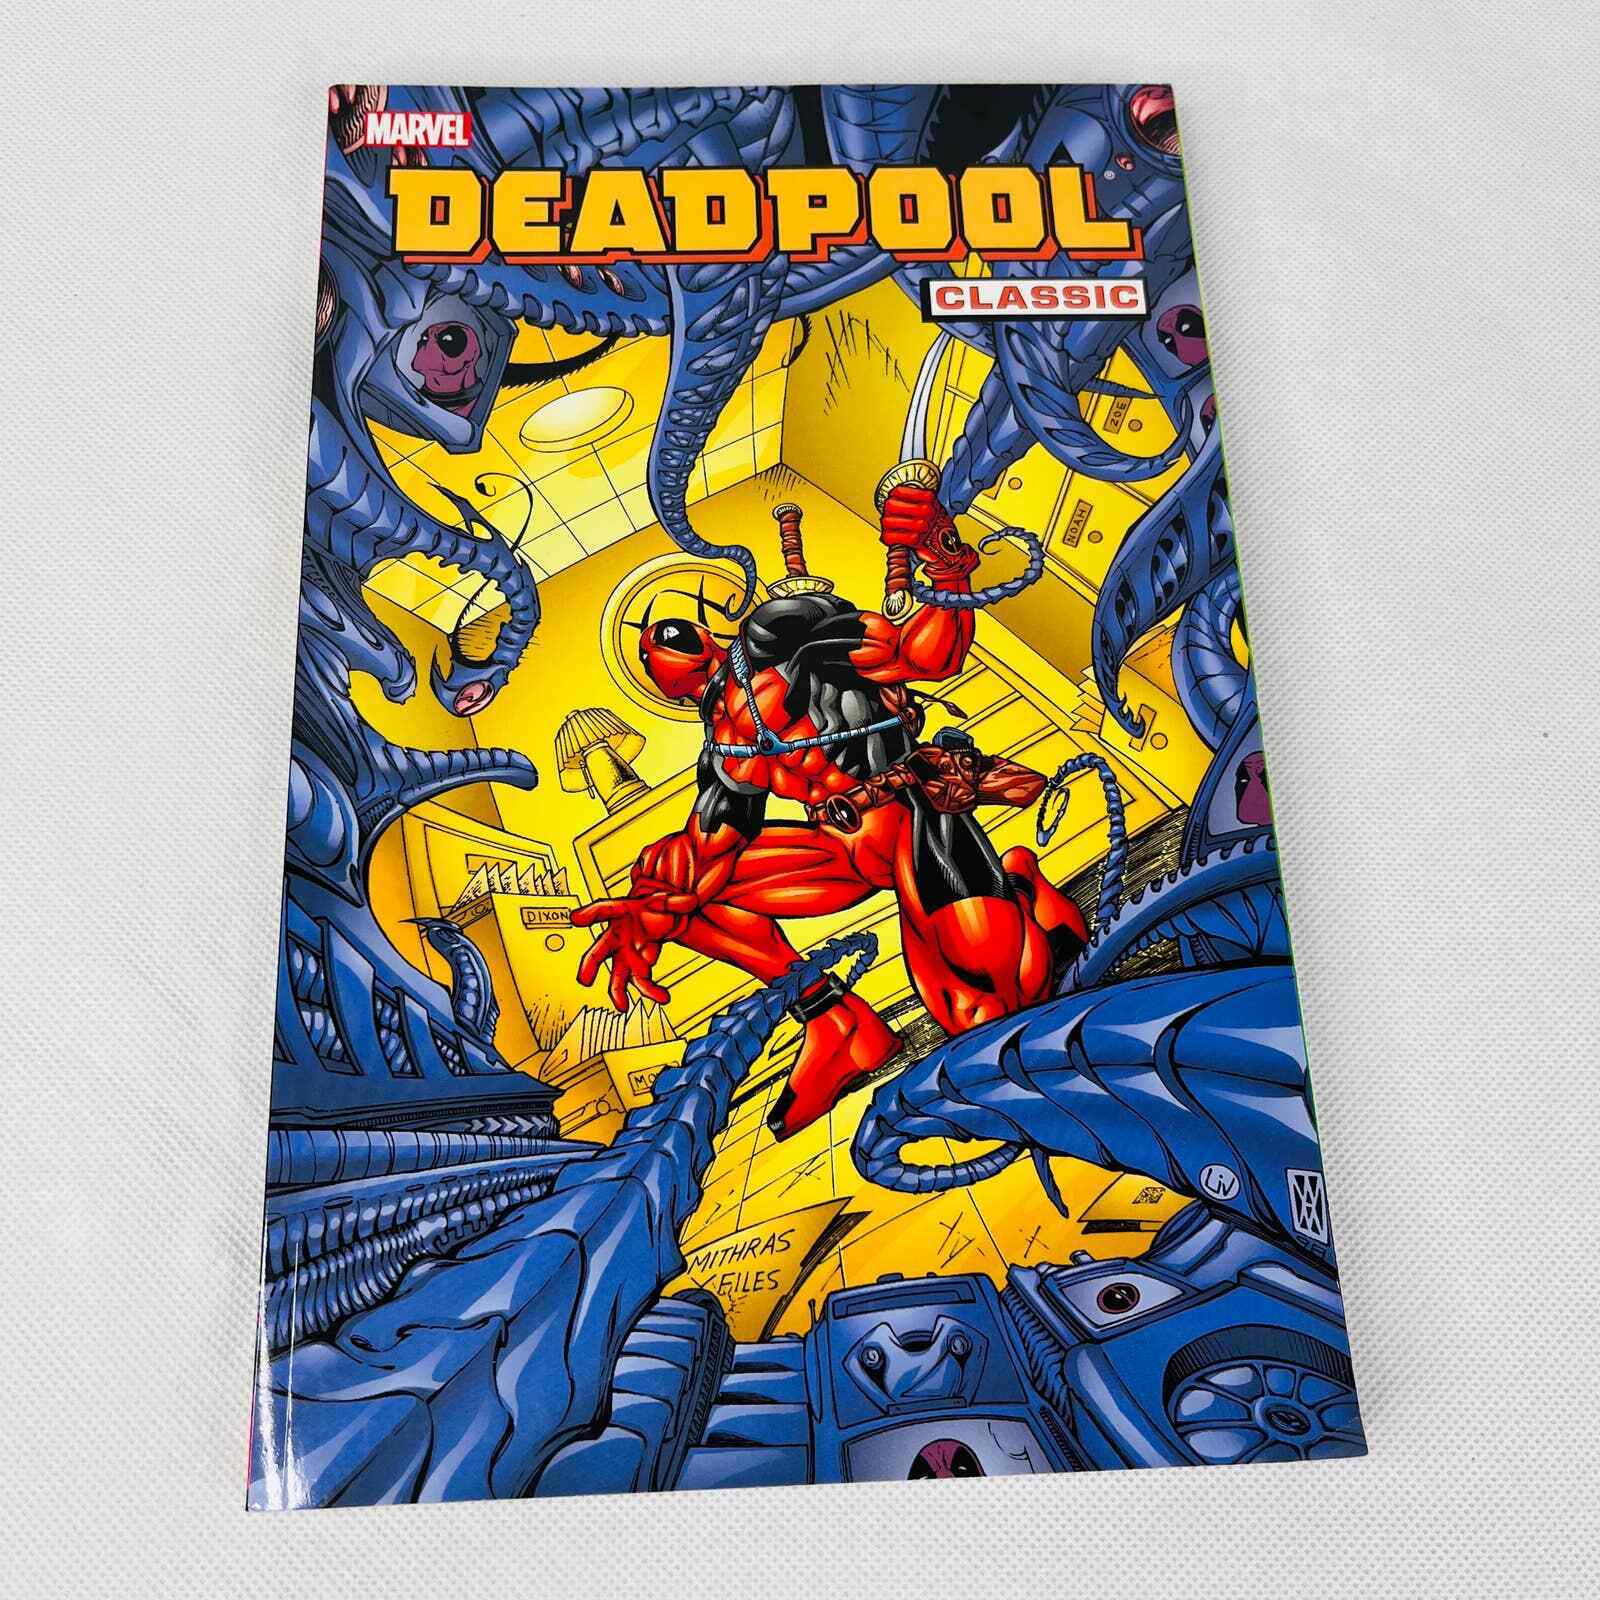 Deadpool by Daniel Way Vol. 1 The Complete Collection (2013 Trade Paperback) TPB